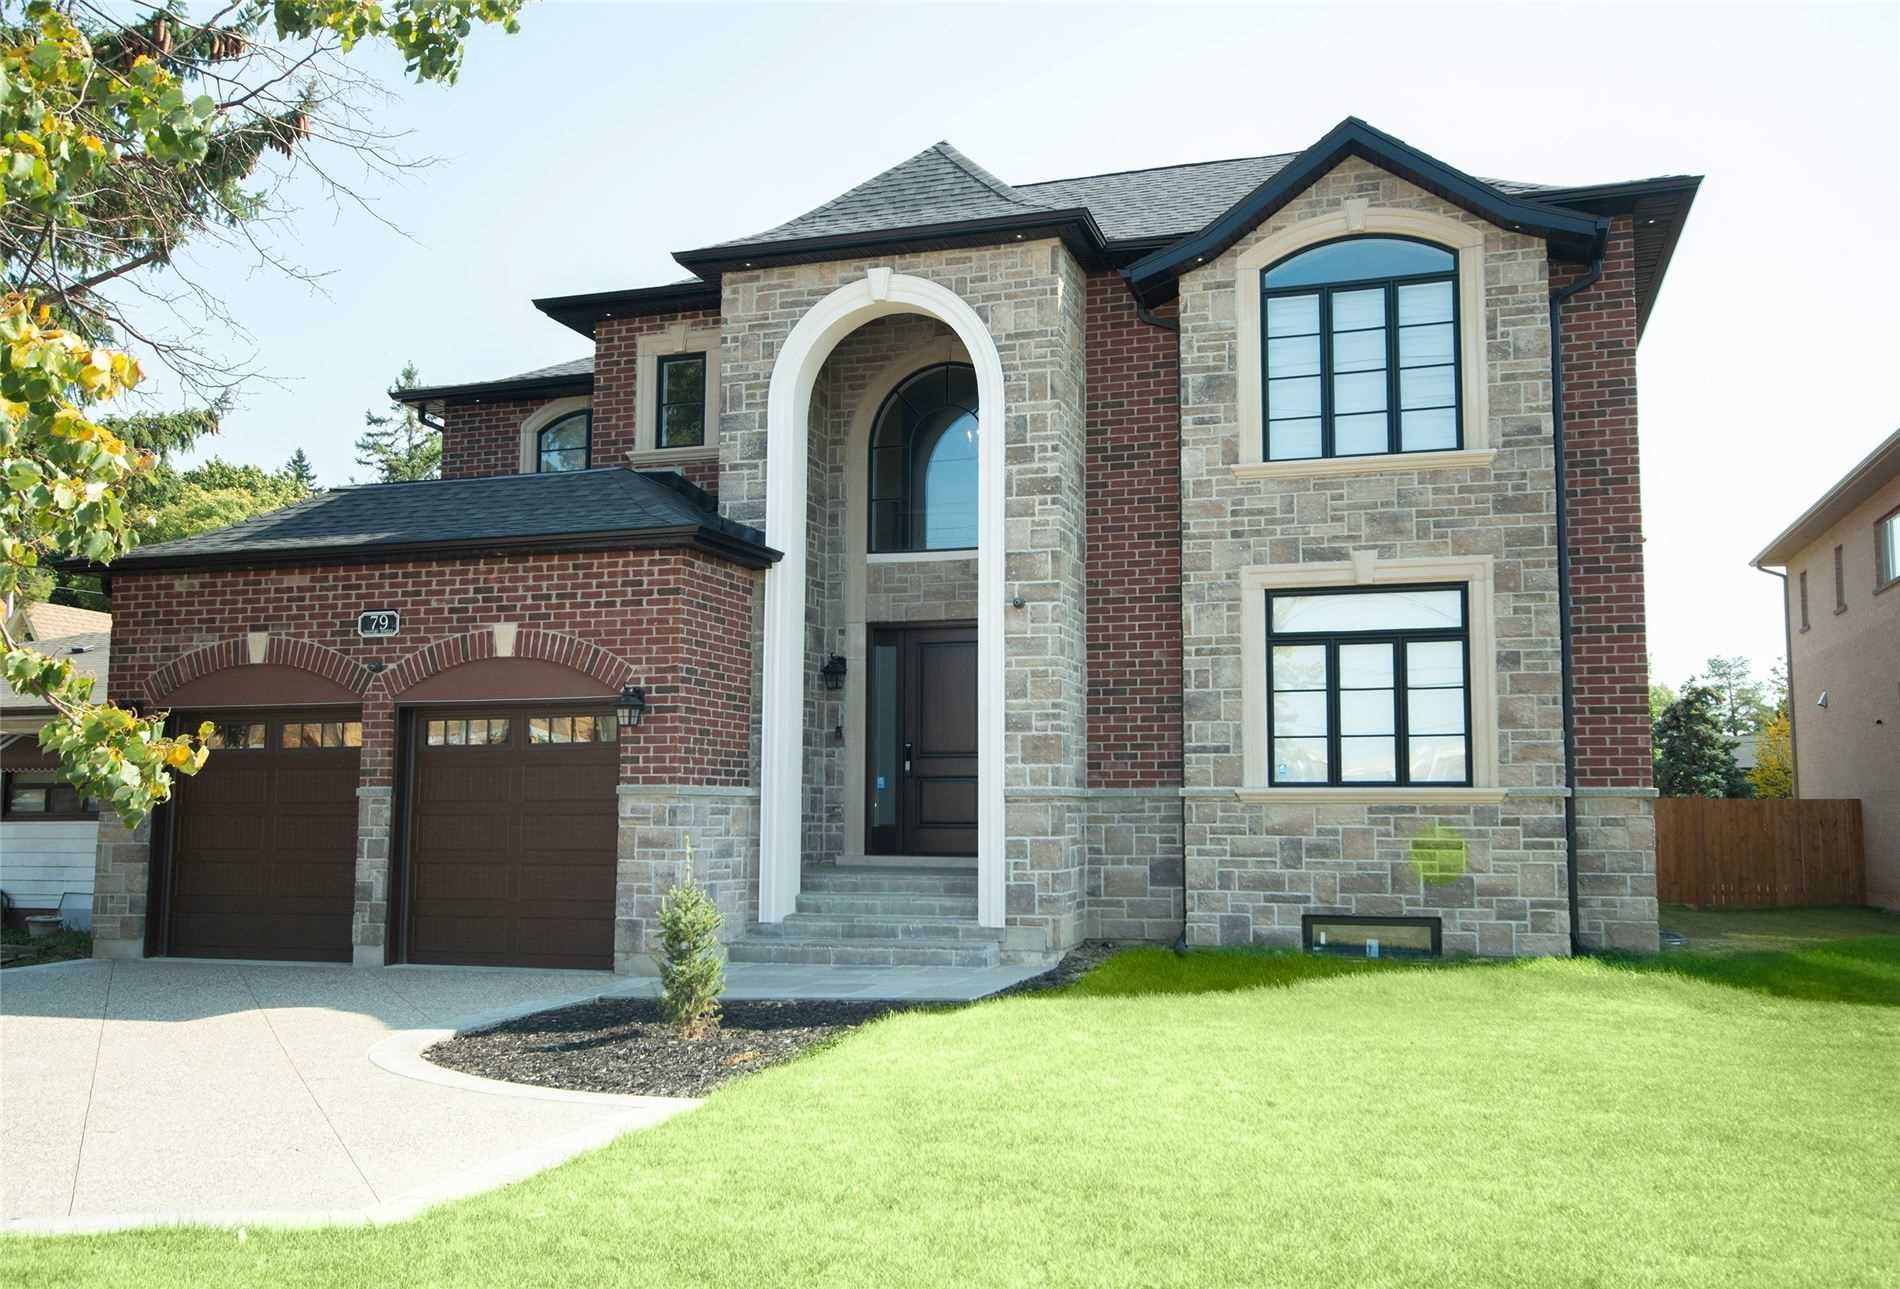 Main Photo: 79 Thomas Street in Mississauga: Streetsville Freehold for sale : MLS®# W4996876